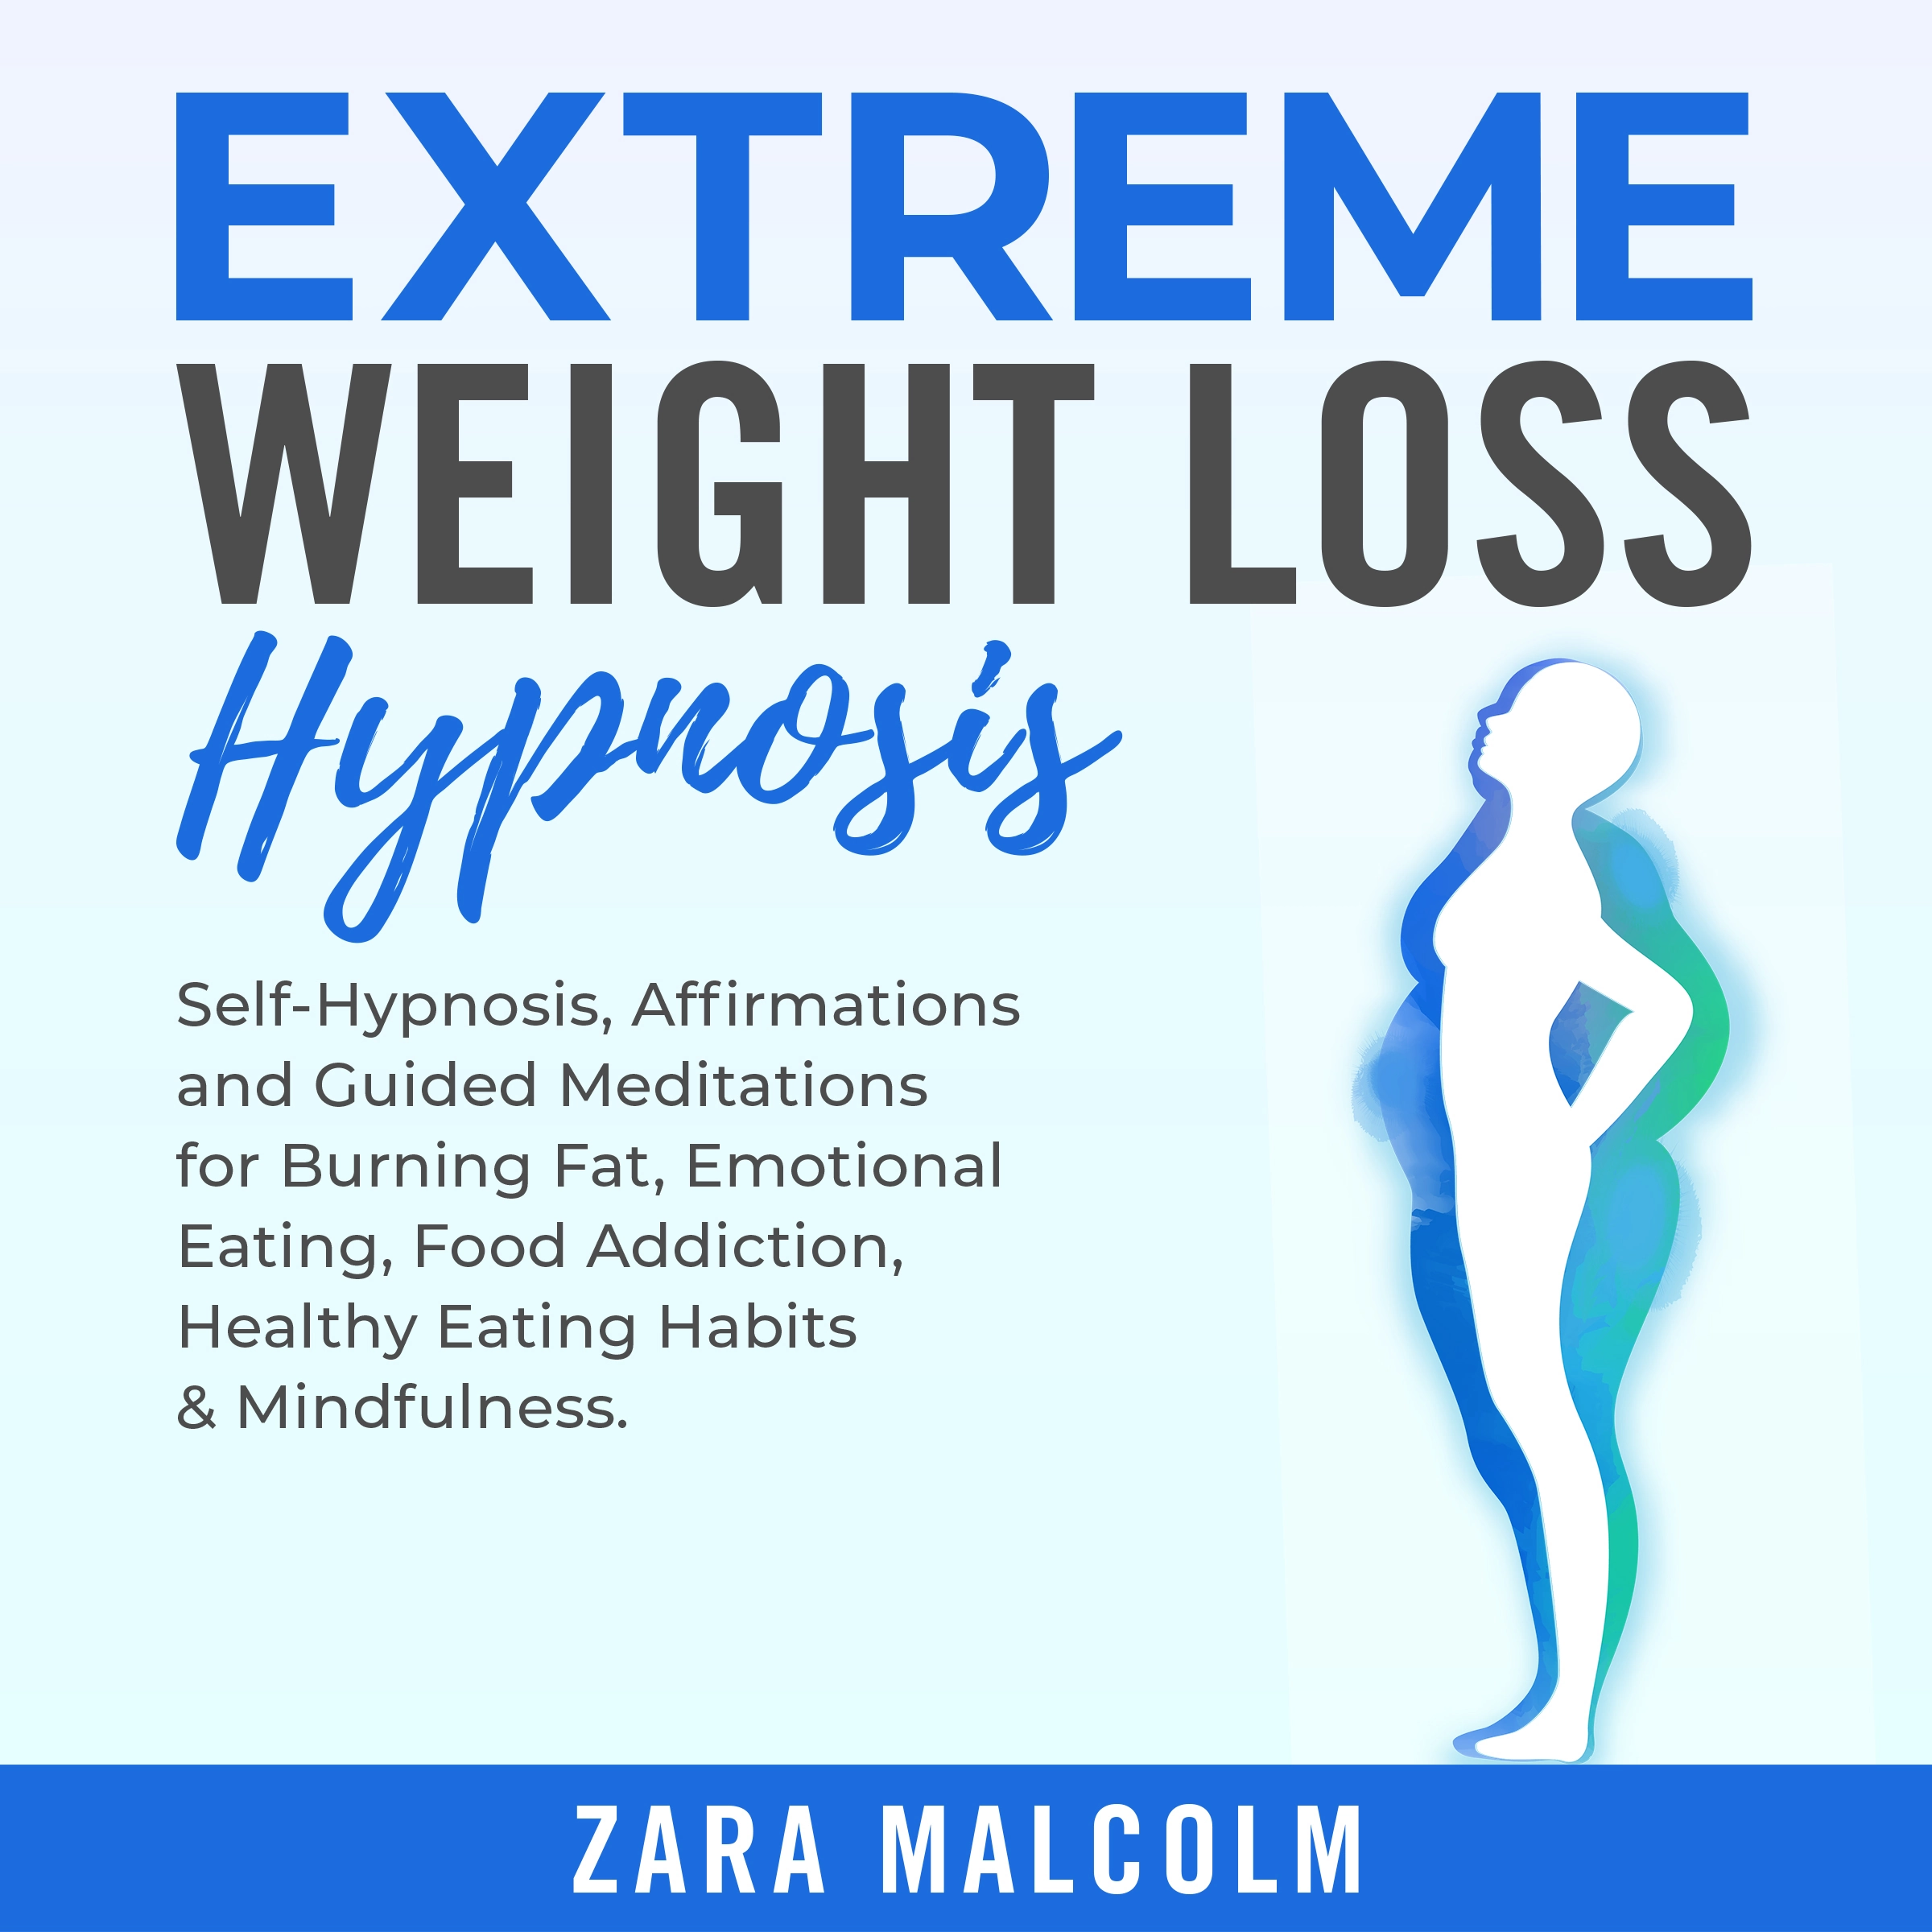 Extreme Weight Loss Hypnosis: Self-Hypnosis, Affirmations and Guided Meditations for Burning Fat, Emotional Eating, Food Addiction, Healthy Eating Habits & Mindfulness. Audiobook by Zara Malcolm